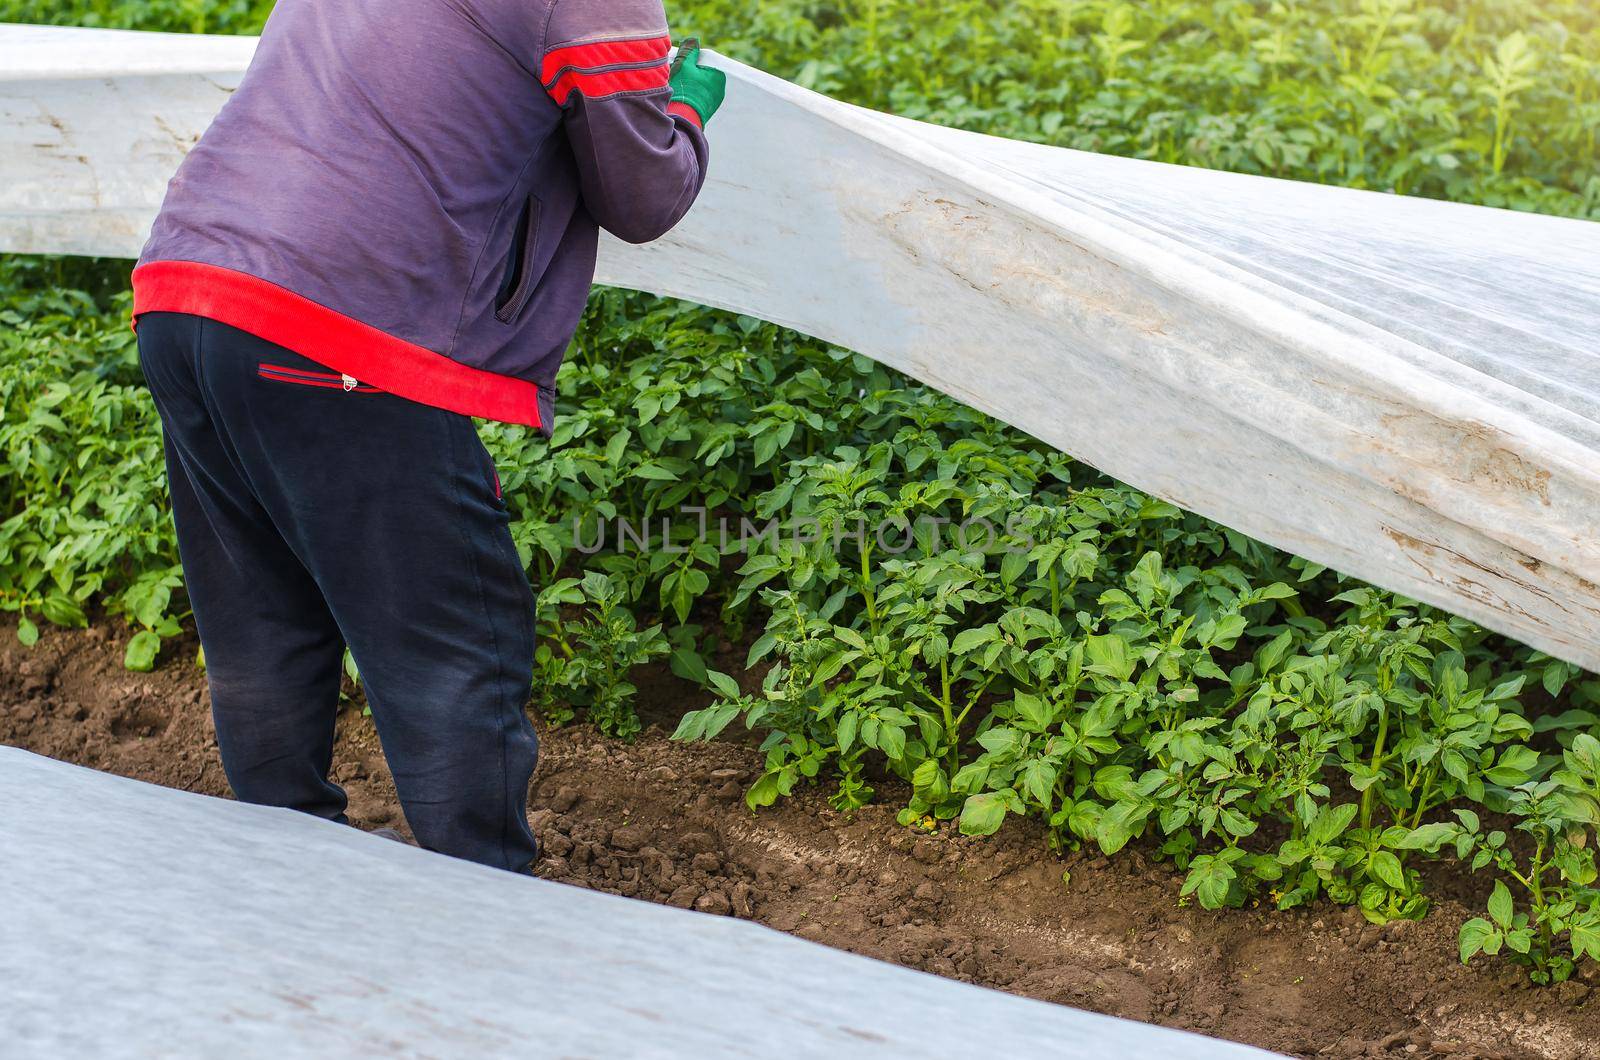 A farmer opens a spunbond potato plantation. Opening of young potato bushes as it warms. Hardening of plants in late spring. Agroindustry, farming. Removal of greenhouse tunnels after warming by iLixe48